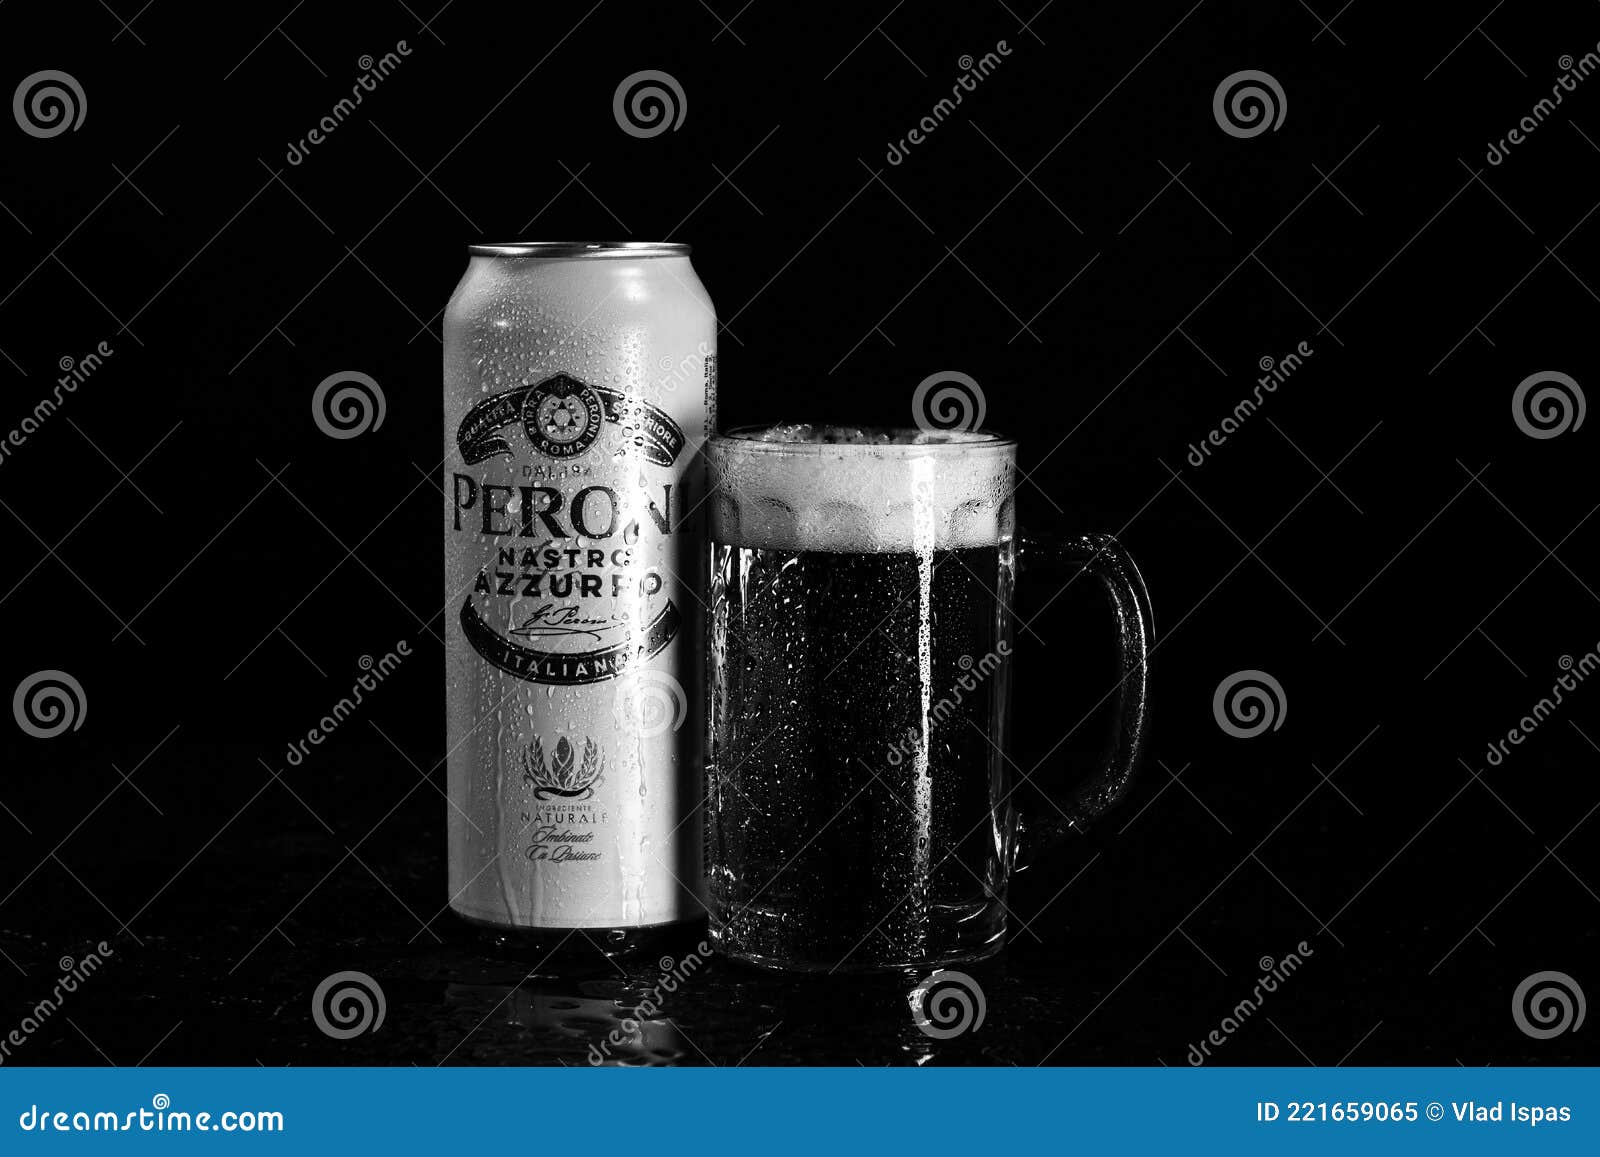 Can of Peroni Nastro Azzurro Beer and Beer Glass on Dark Background.  Illustrative Editorial Photo Shot in Bucharest, Romania, 2021 Editorial  Image - Image of glass, droplets: 221659065